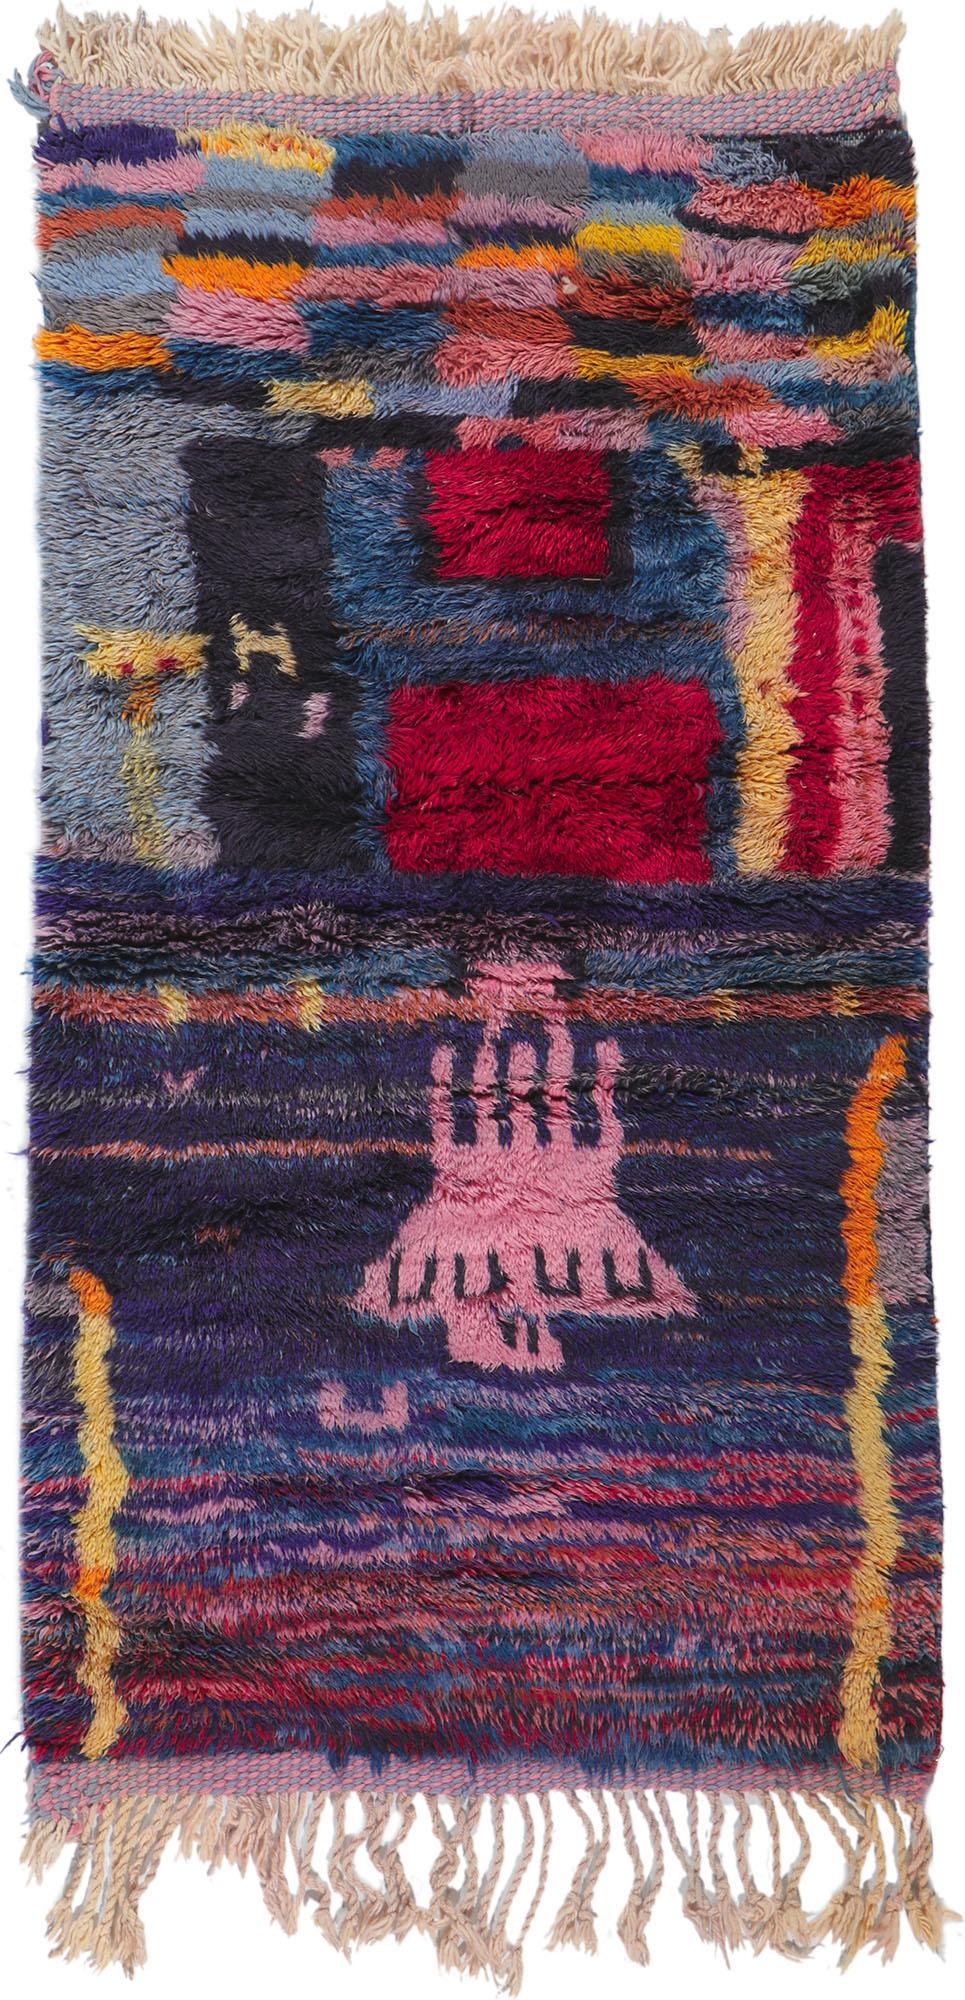 Contemporary Colorful Beni Ourain Moroccan Rug by Berber Tribes of Morocco For Sale 3